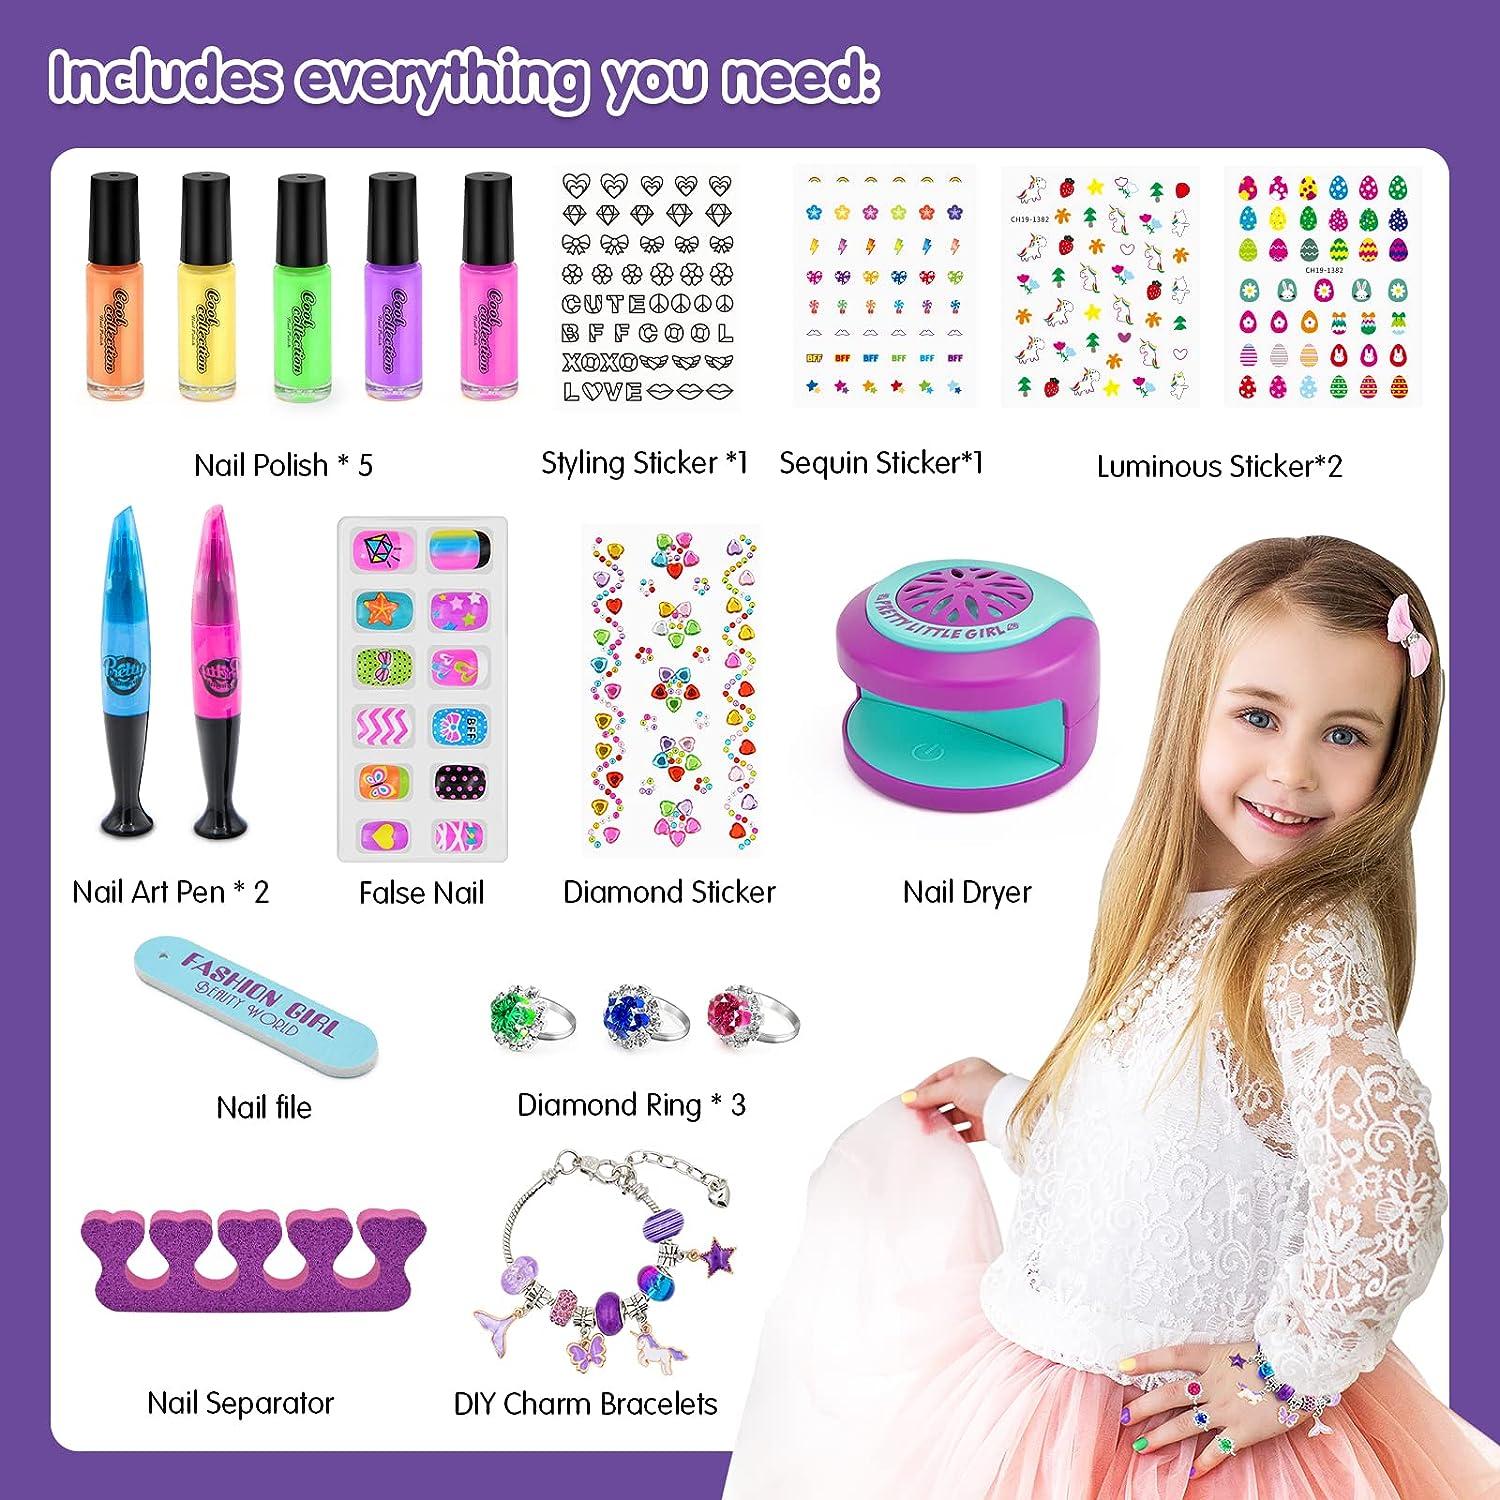 BATTOP Kids Nail Polish Kit Set for Girls, Nail Art Studio for Teenage with  Nail Dryer & Polish Pen & 3D Decoration Cool Birthday Gifts for 7 8 9 10